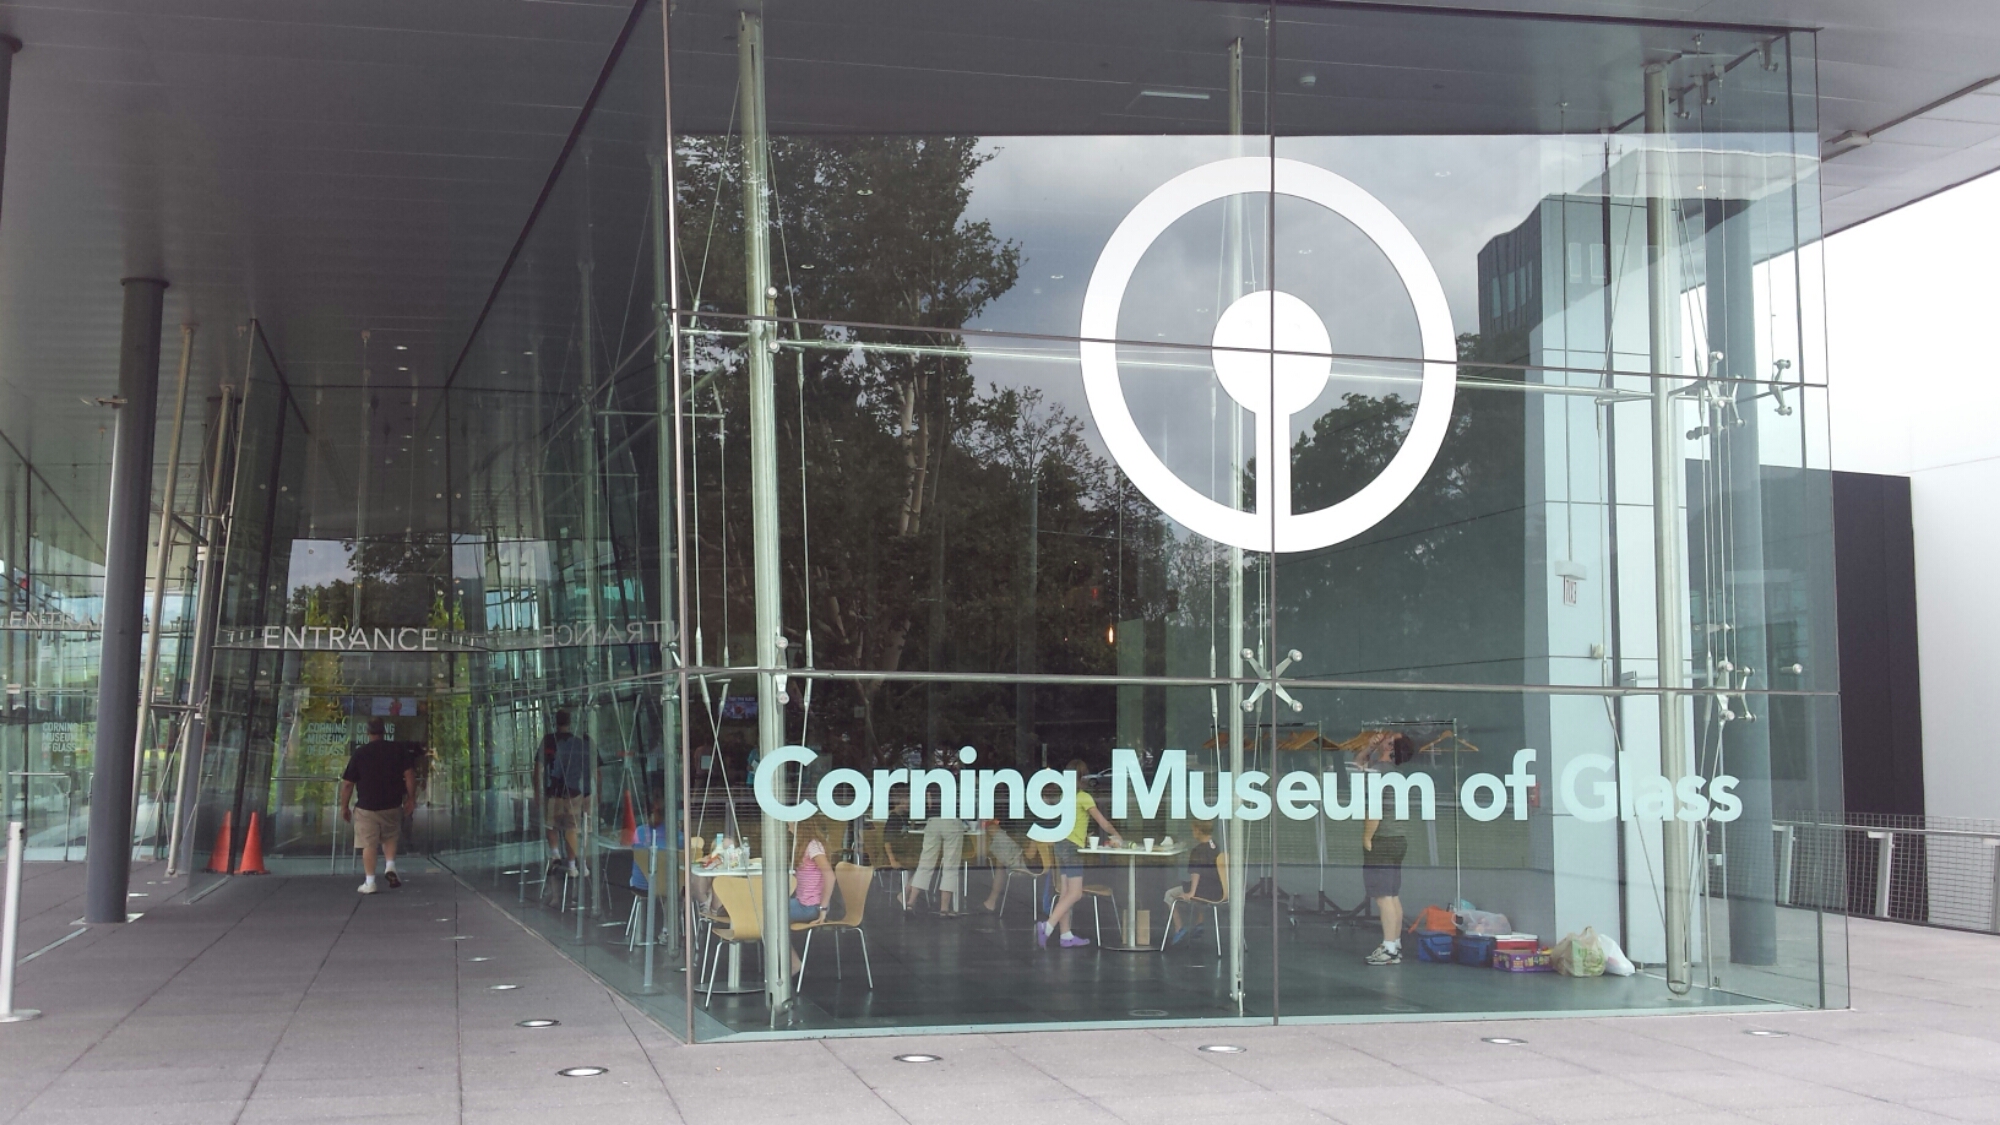 Have you been to the Corning Museum of Glass?